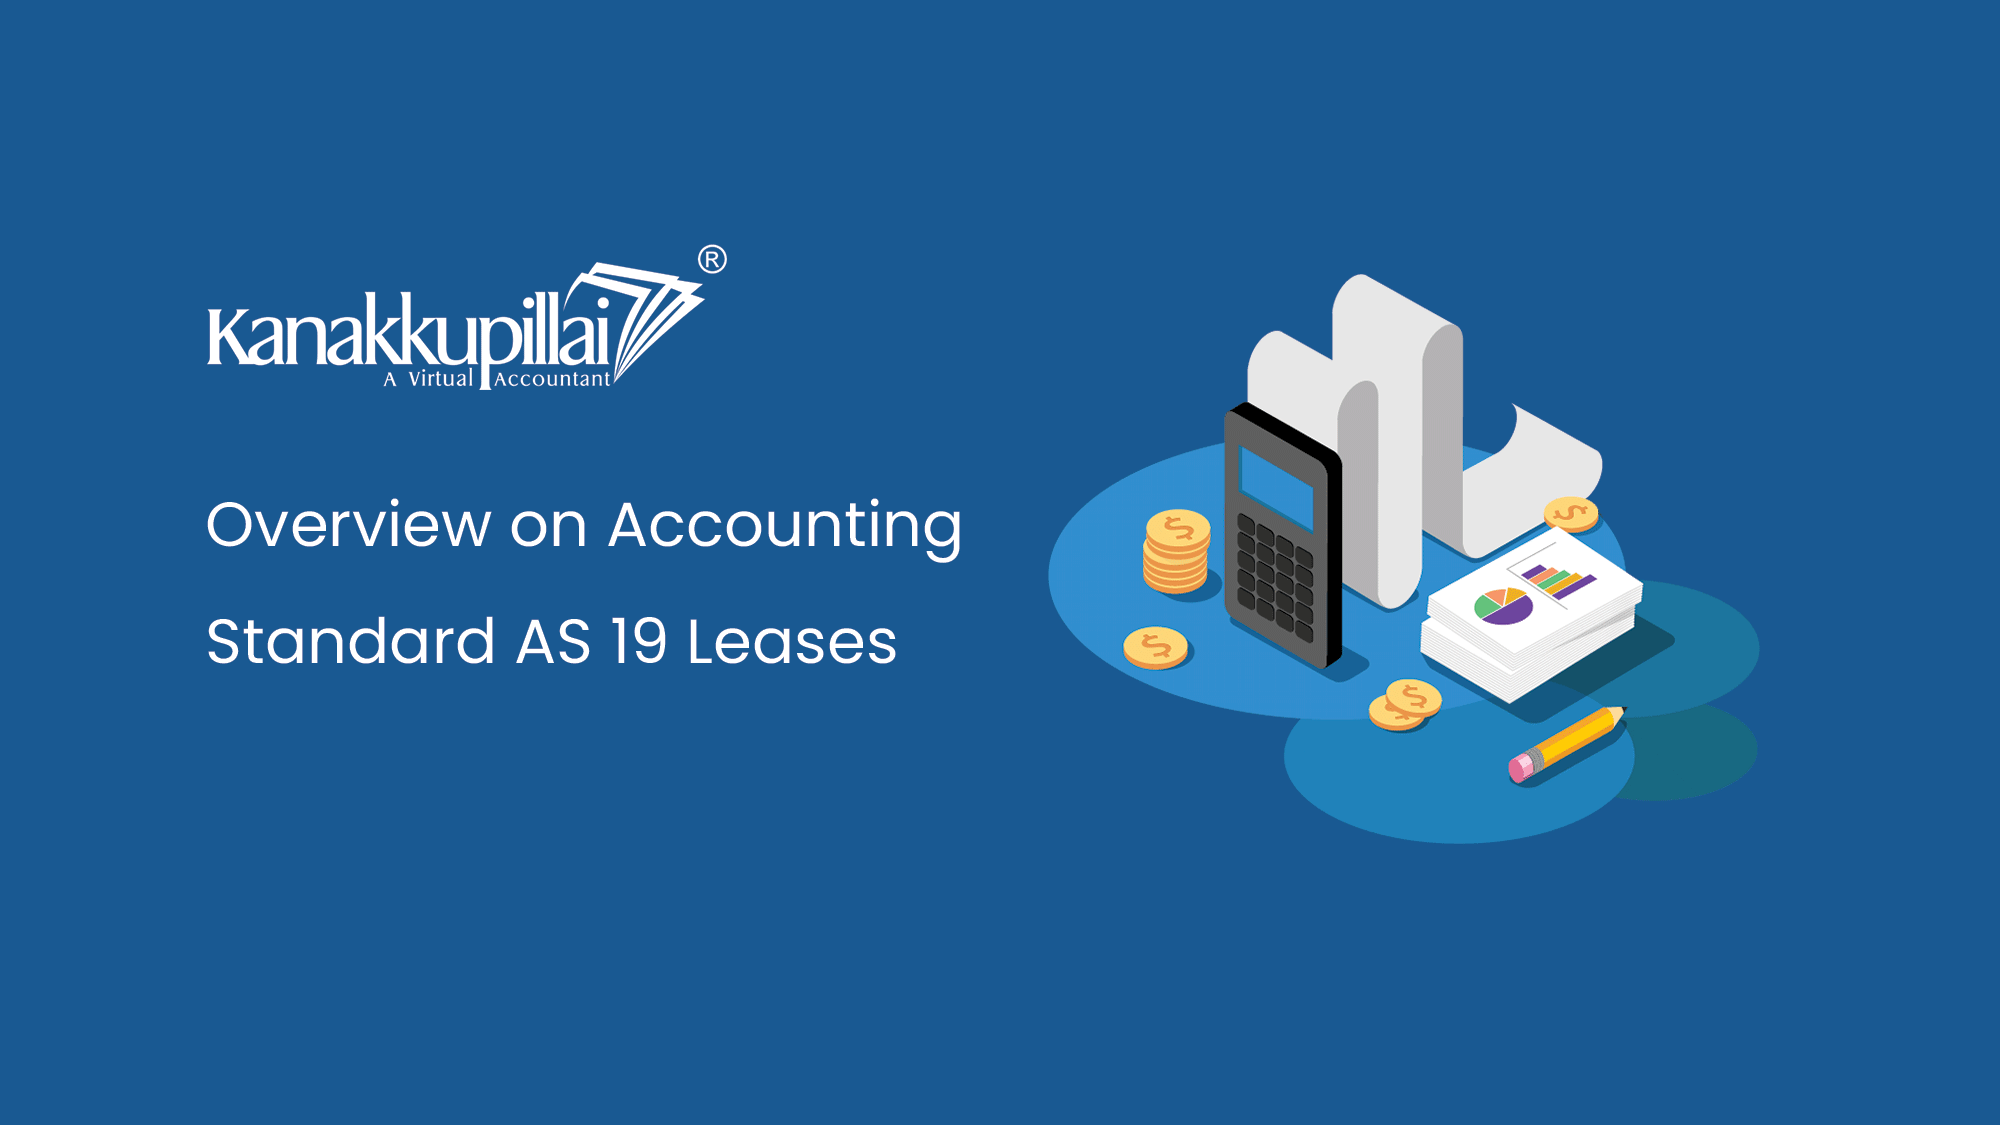 Overview on Accounting Standard AS 19 Leases